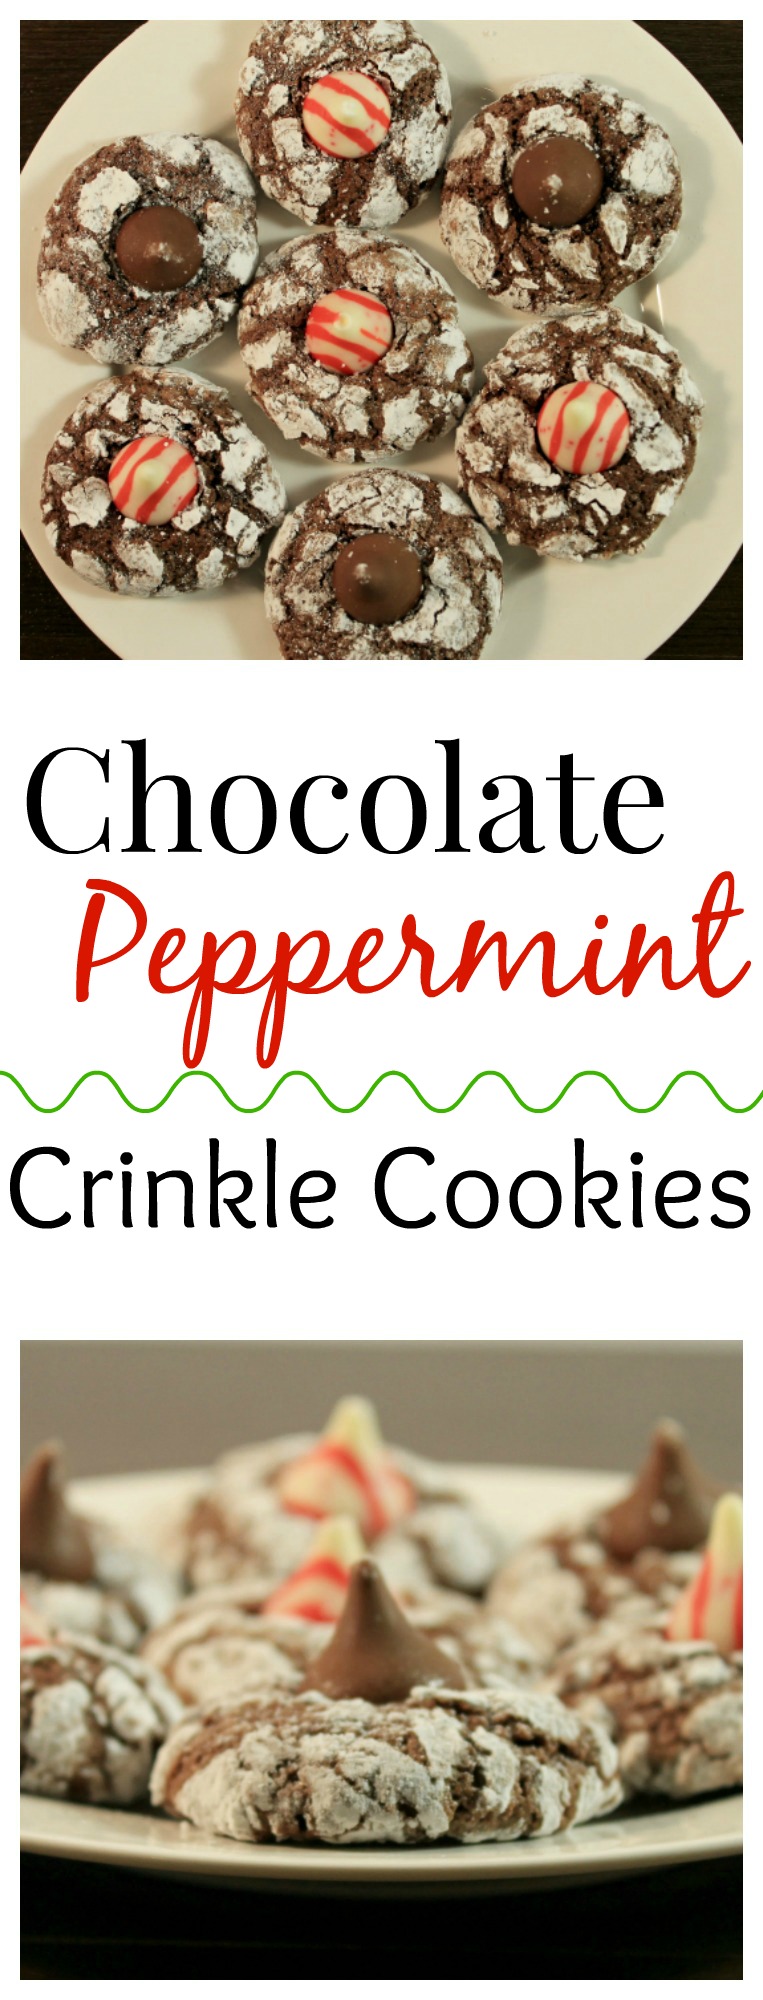 Chocolate Peppermint Crinkle Cookies - a chewy chocolate cookie topped with peppermint kisses! 